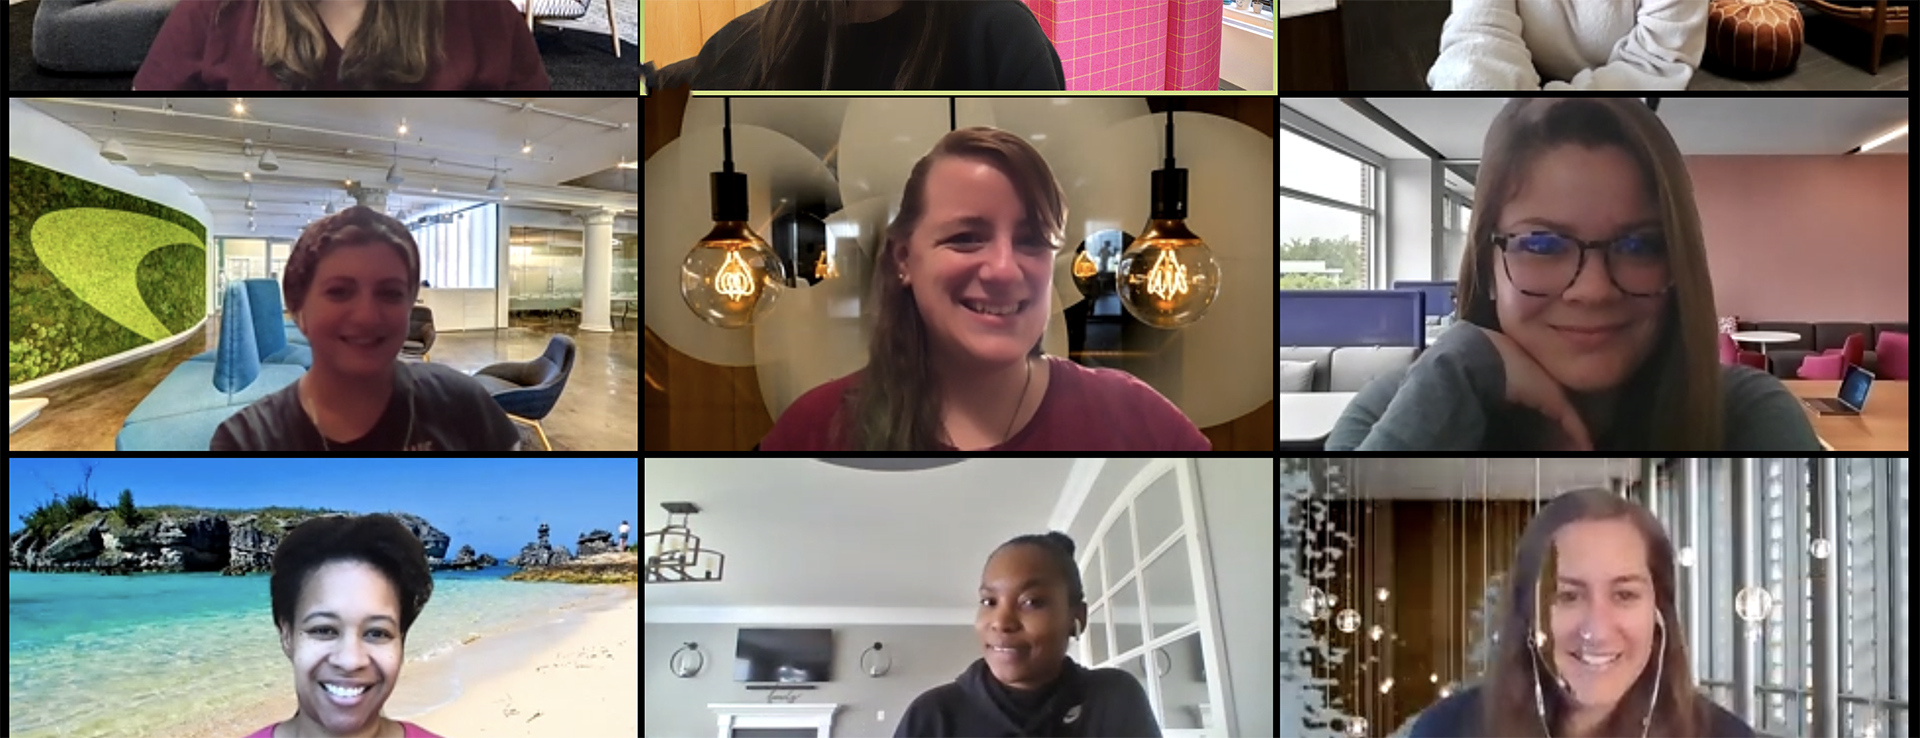 Capital One offers zoom background inspiration for virtual meetings